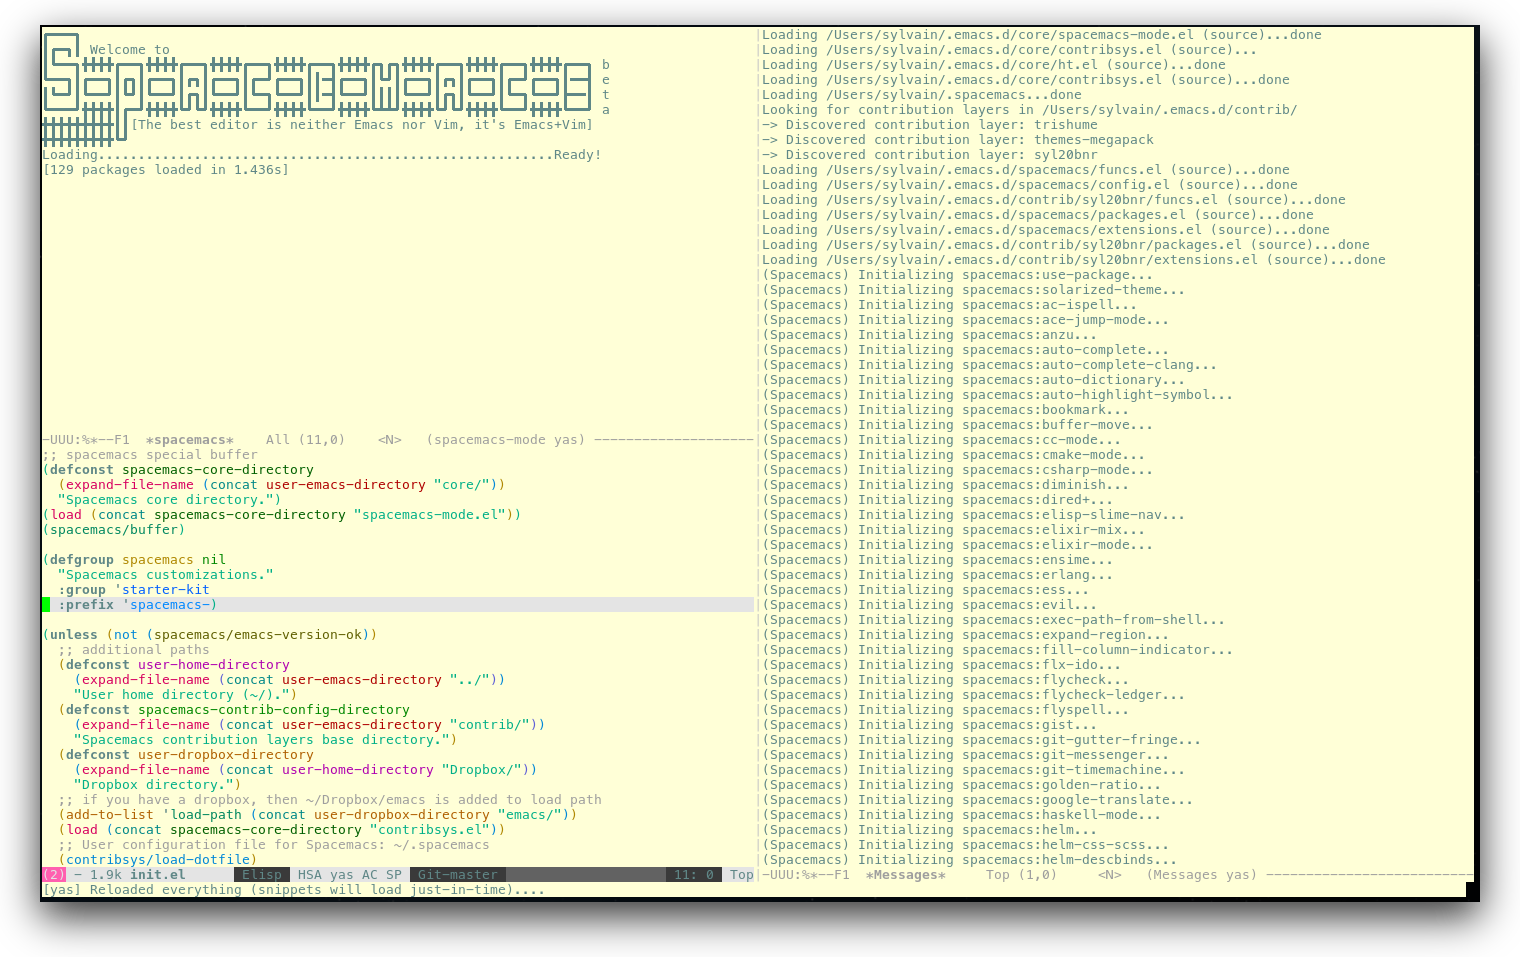 /TakeV/spacemacs/media/commit/a3aaf8a8f92d519f4692d2d9dd16ed480b5ea534/doc/img/spacemacs-urxvt.png